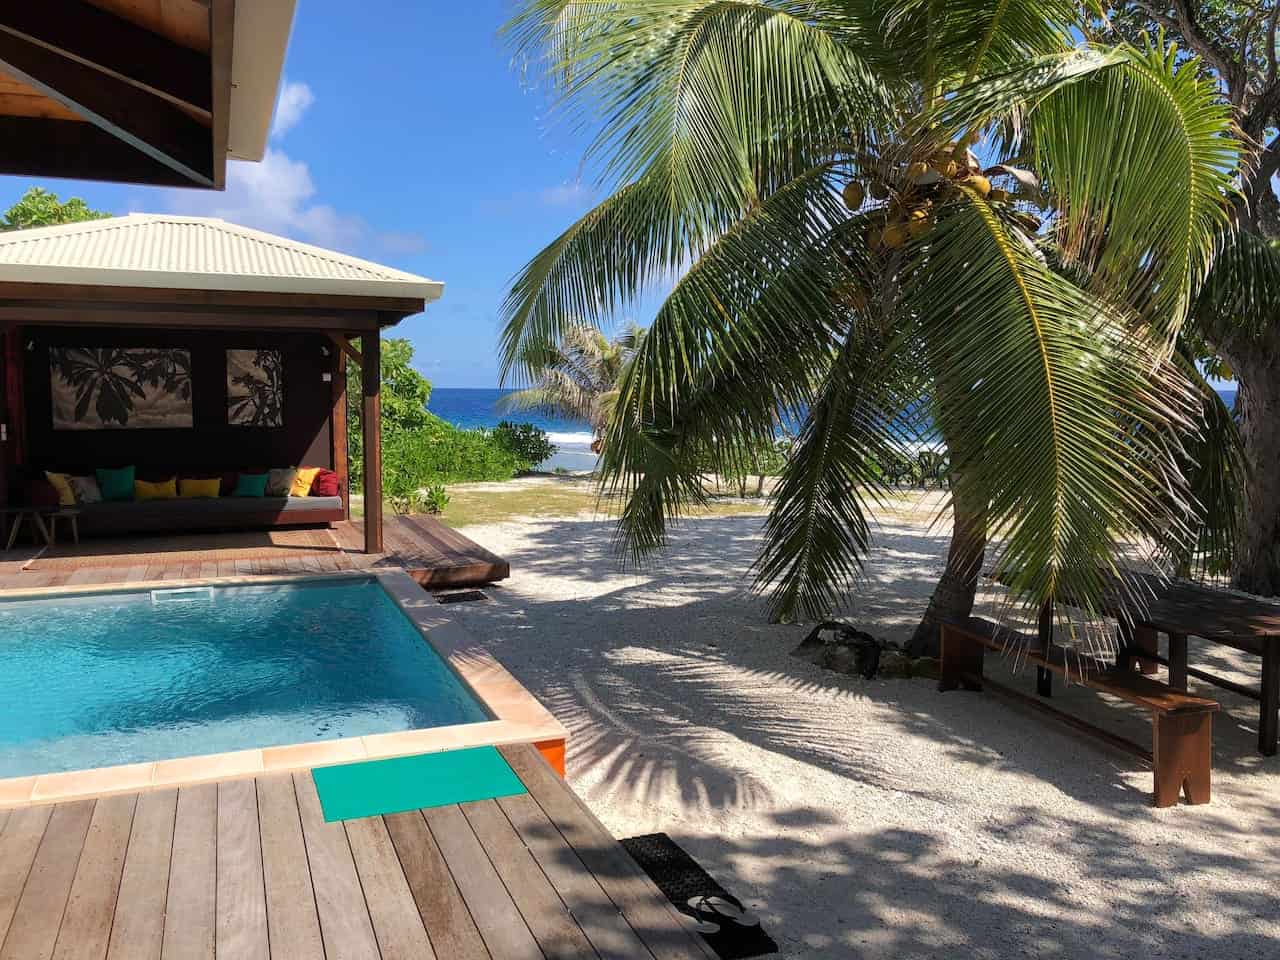 Image of Airbnb rental in Moorea, French Polynesia